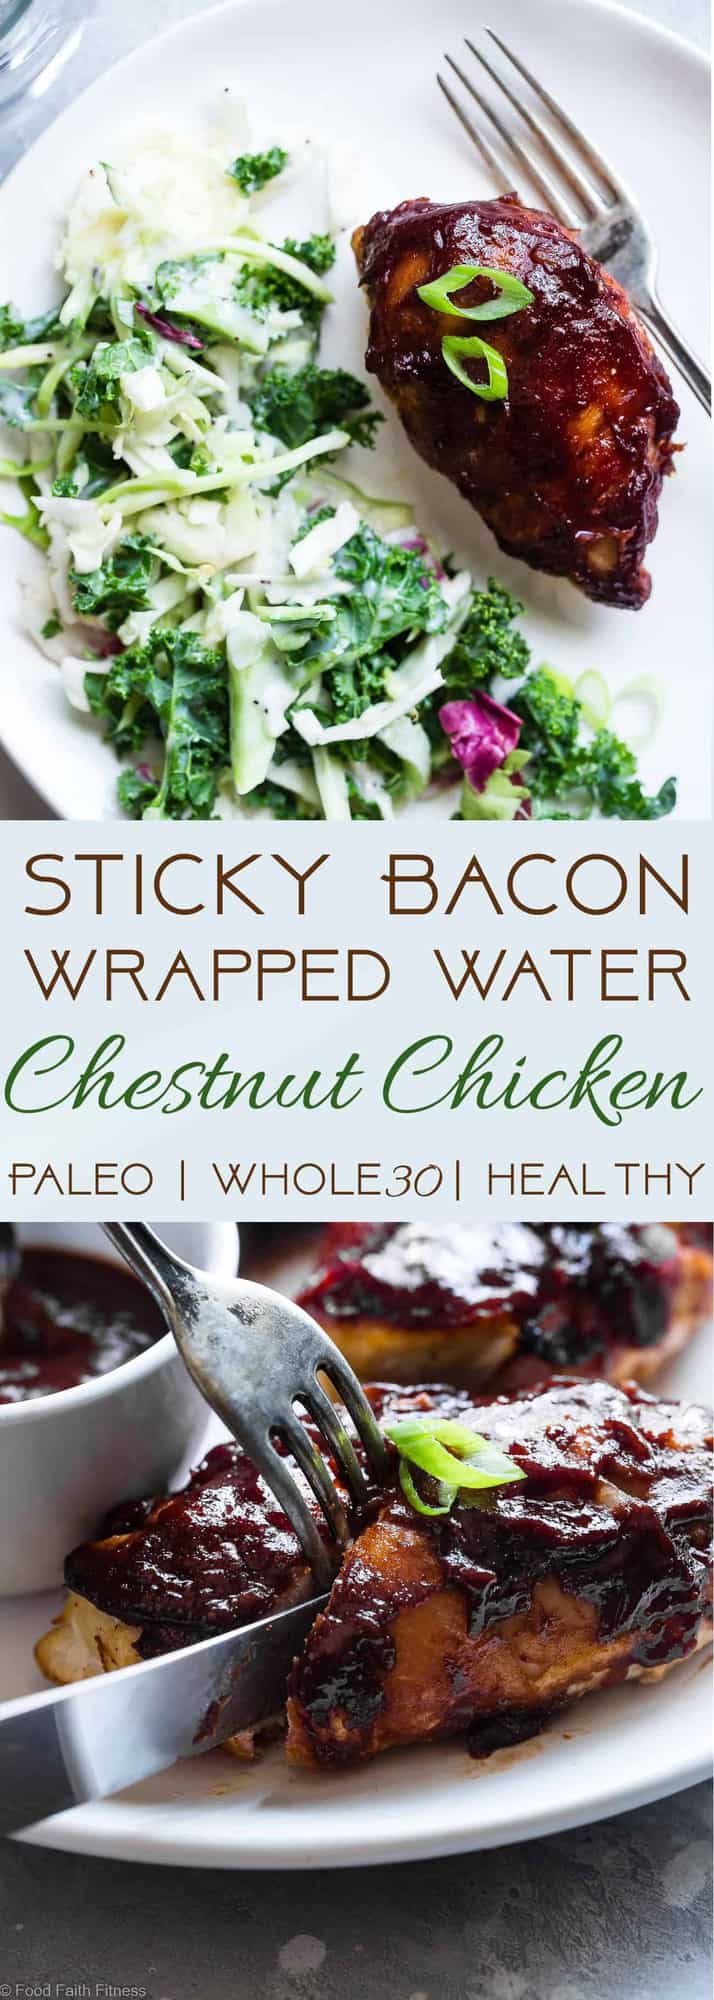 Bacon Wrapped Sweet and Sticky Water Chestnut Chicken - This tastes like a bacon wrapped water chestnut, but in a 30 minute, weeknight, family friendly dinner that is easy, paleo and whole30 friendly! Only 210 calories and sugar free too! | #Foodfaithfitness | #Glutenfree #Paleo #Whole30 #Grainfree #healthy